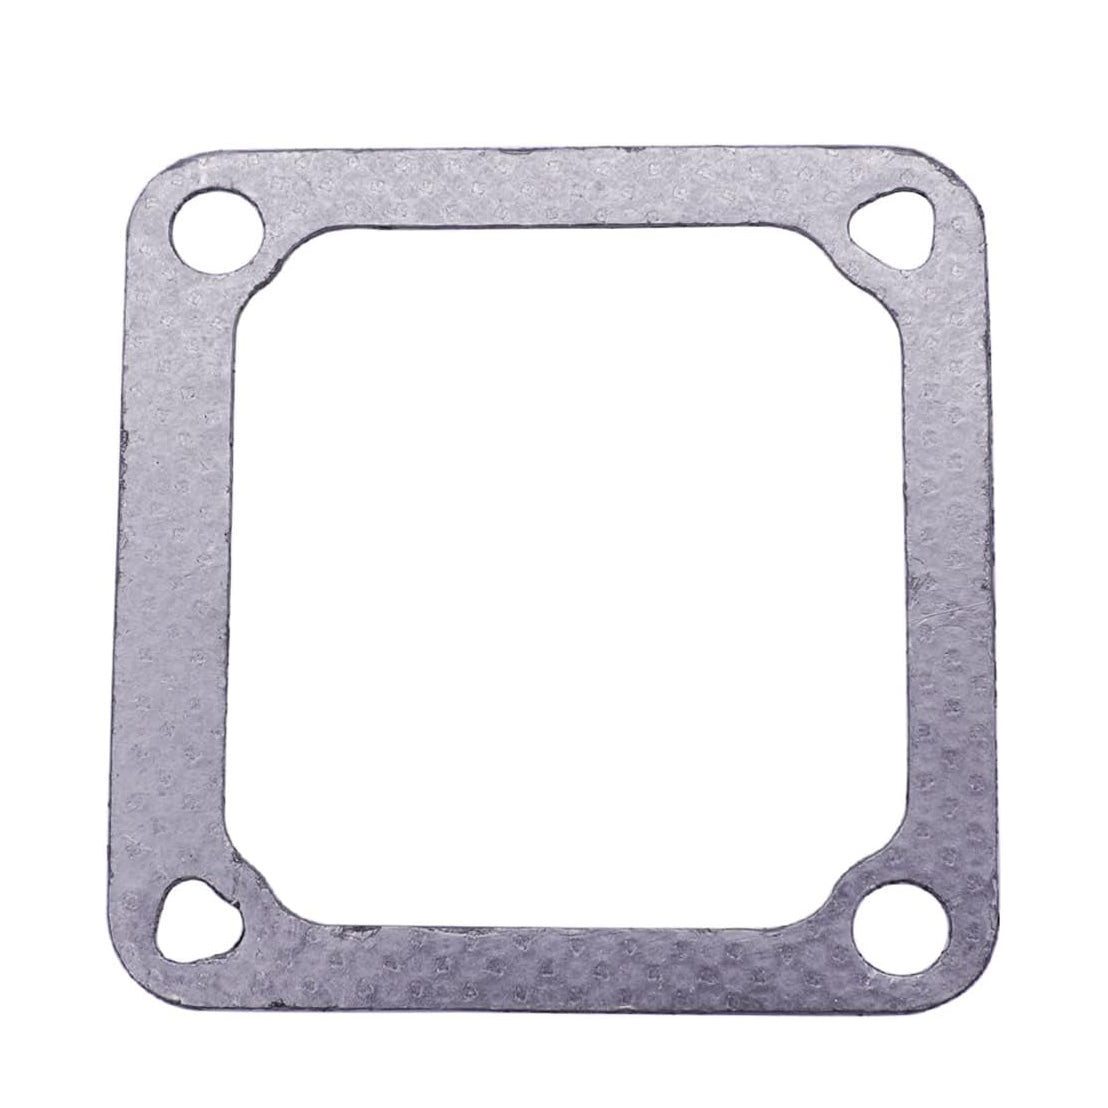 New Intake Grid Heater & Gasket 3969988 3970001 Compatible with Dodge Cummins 5.9L Turbo 6B 5.9